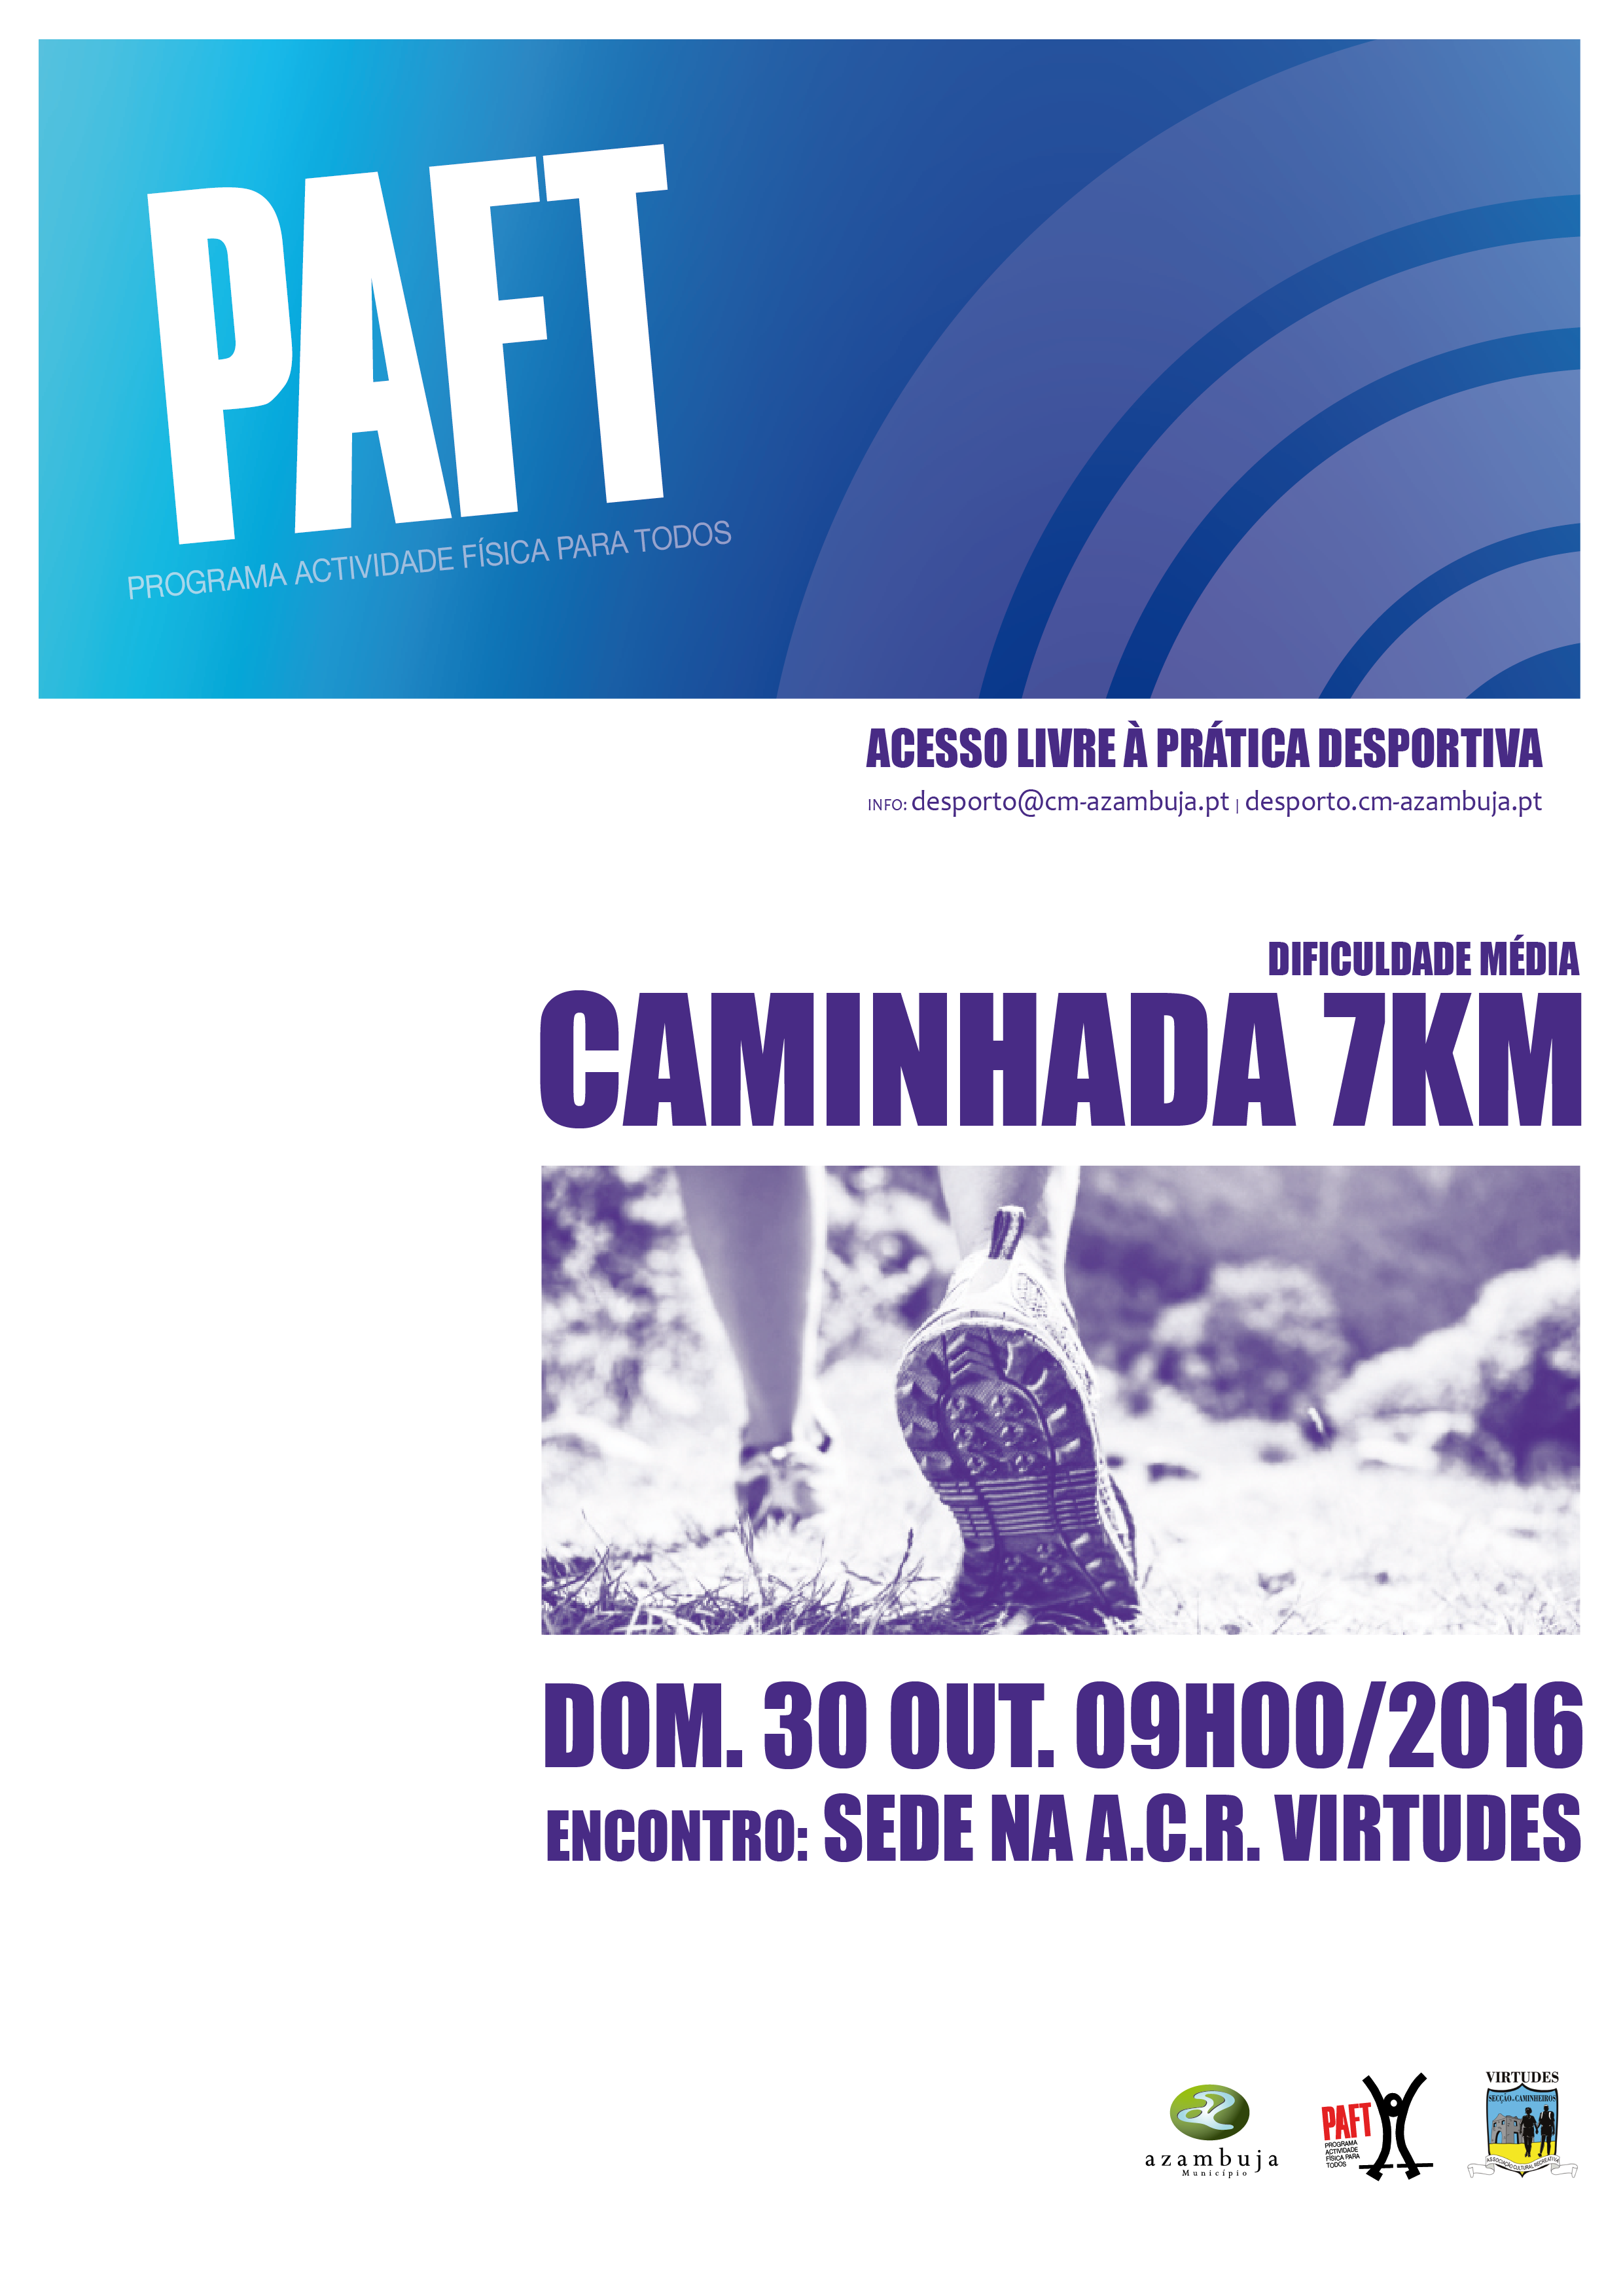 paftvirtudes30OUT2016